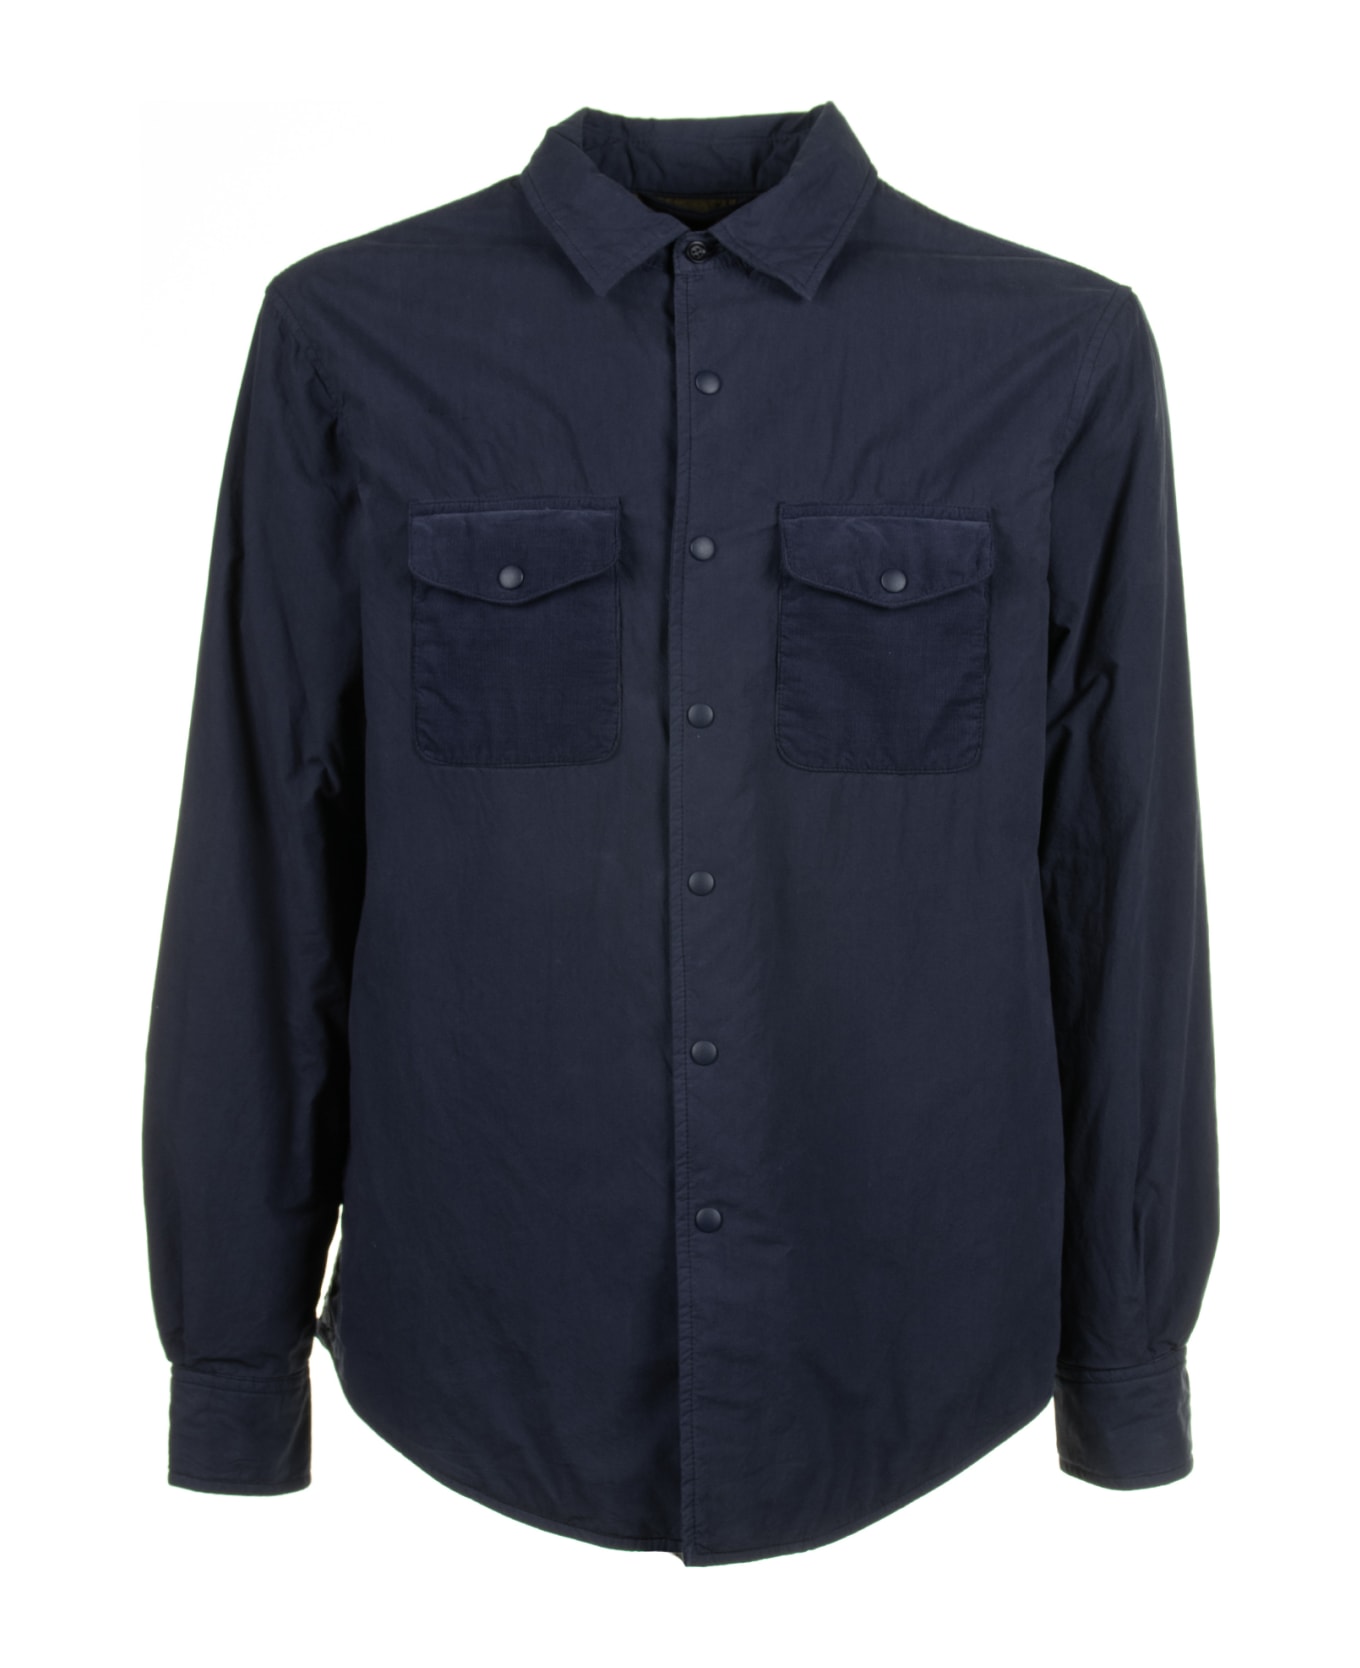 Aspesi Navy Blue Jacket With Buttons And Pockets - BLUE